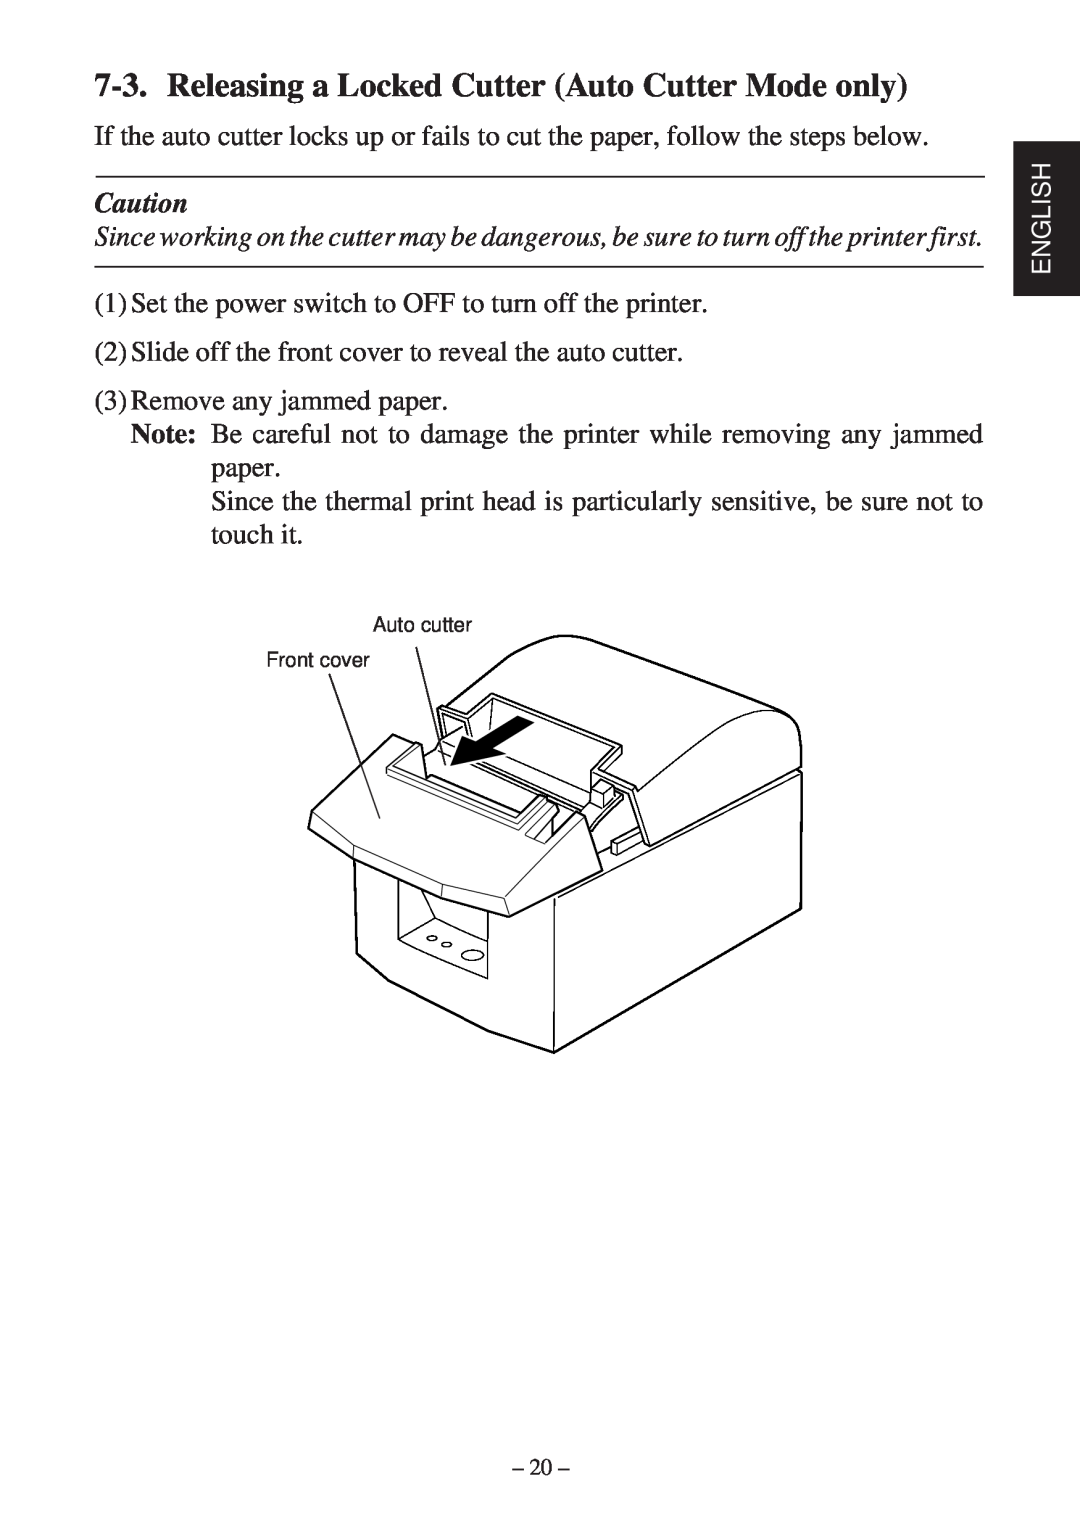 Star Micronics TSP600 user manual Releasing a Locked Cutter Auto Cutter Mode only 